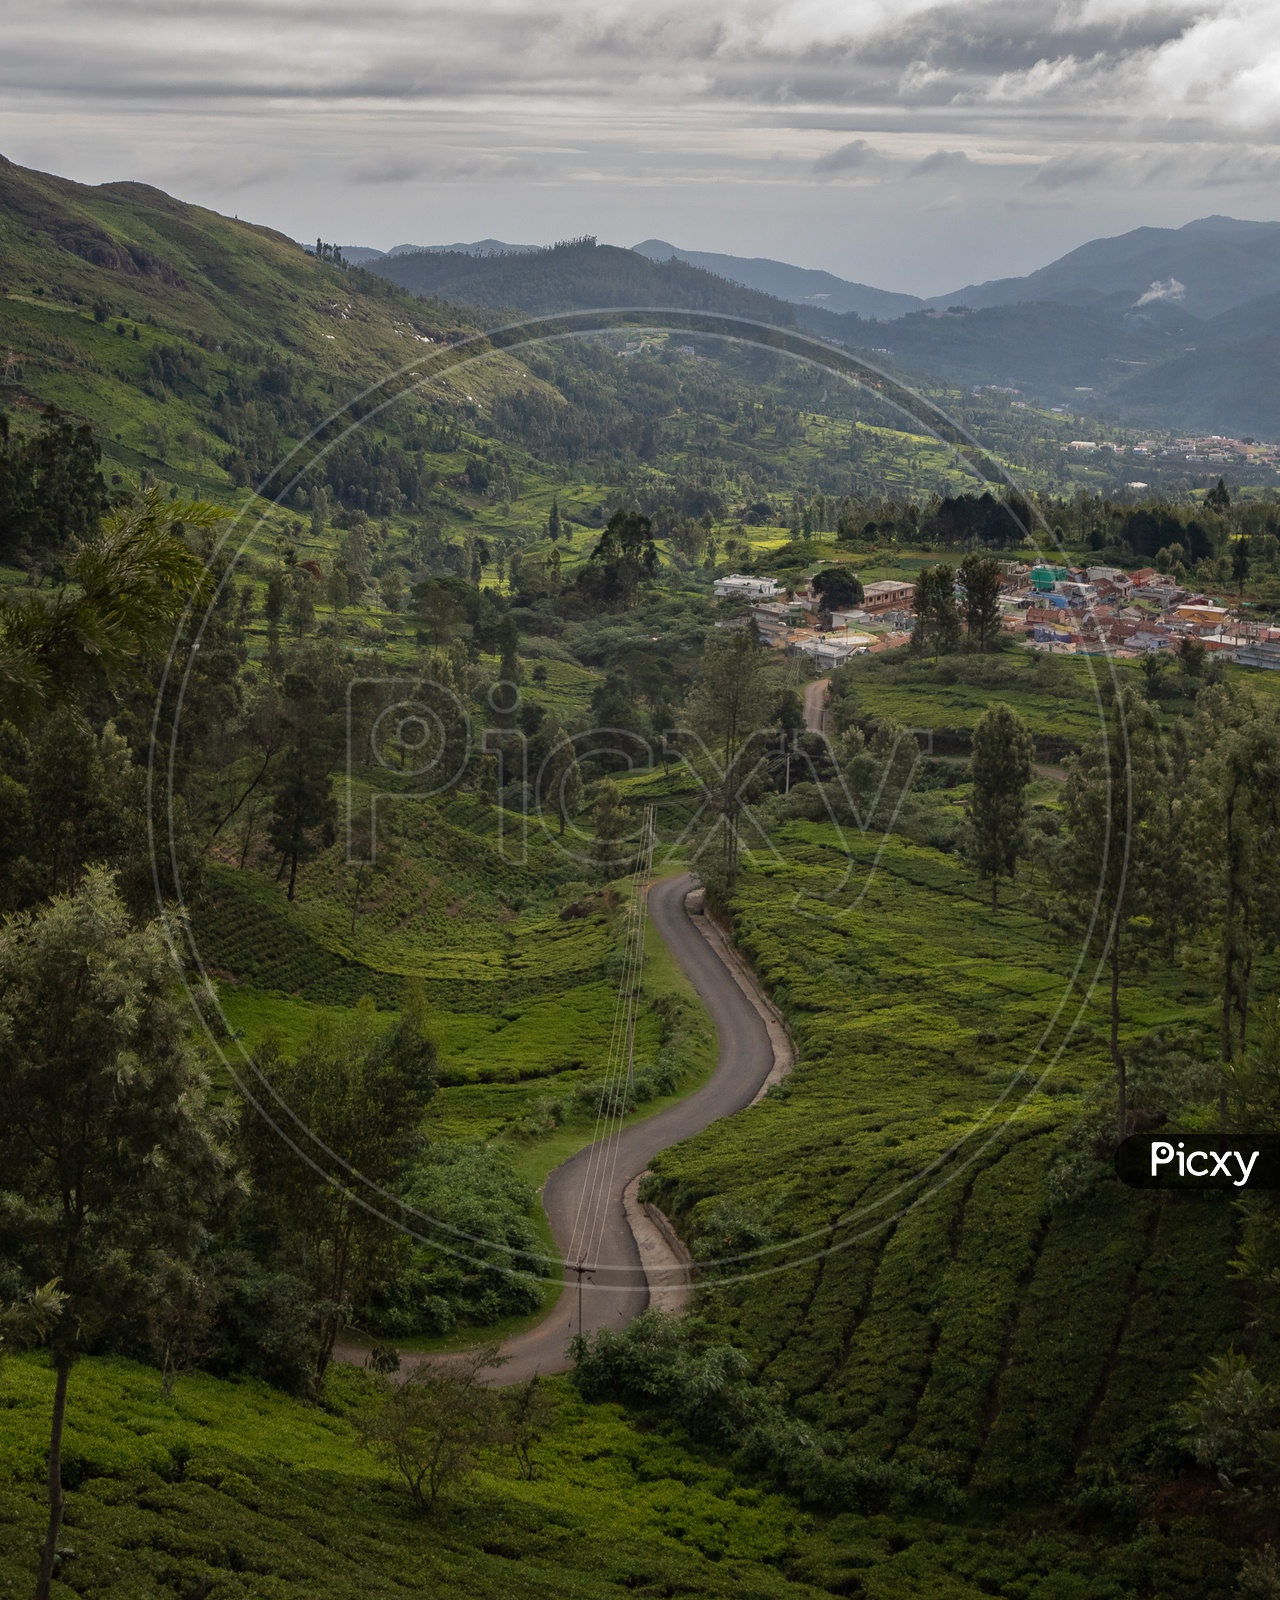 Aerial View of Tea Plantations in Ooty From With Roads in Between The Plantations